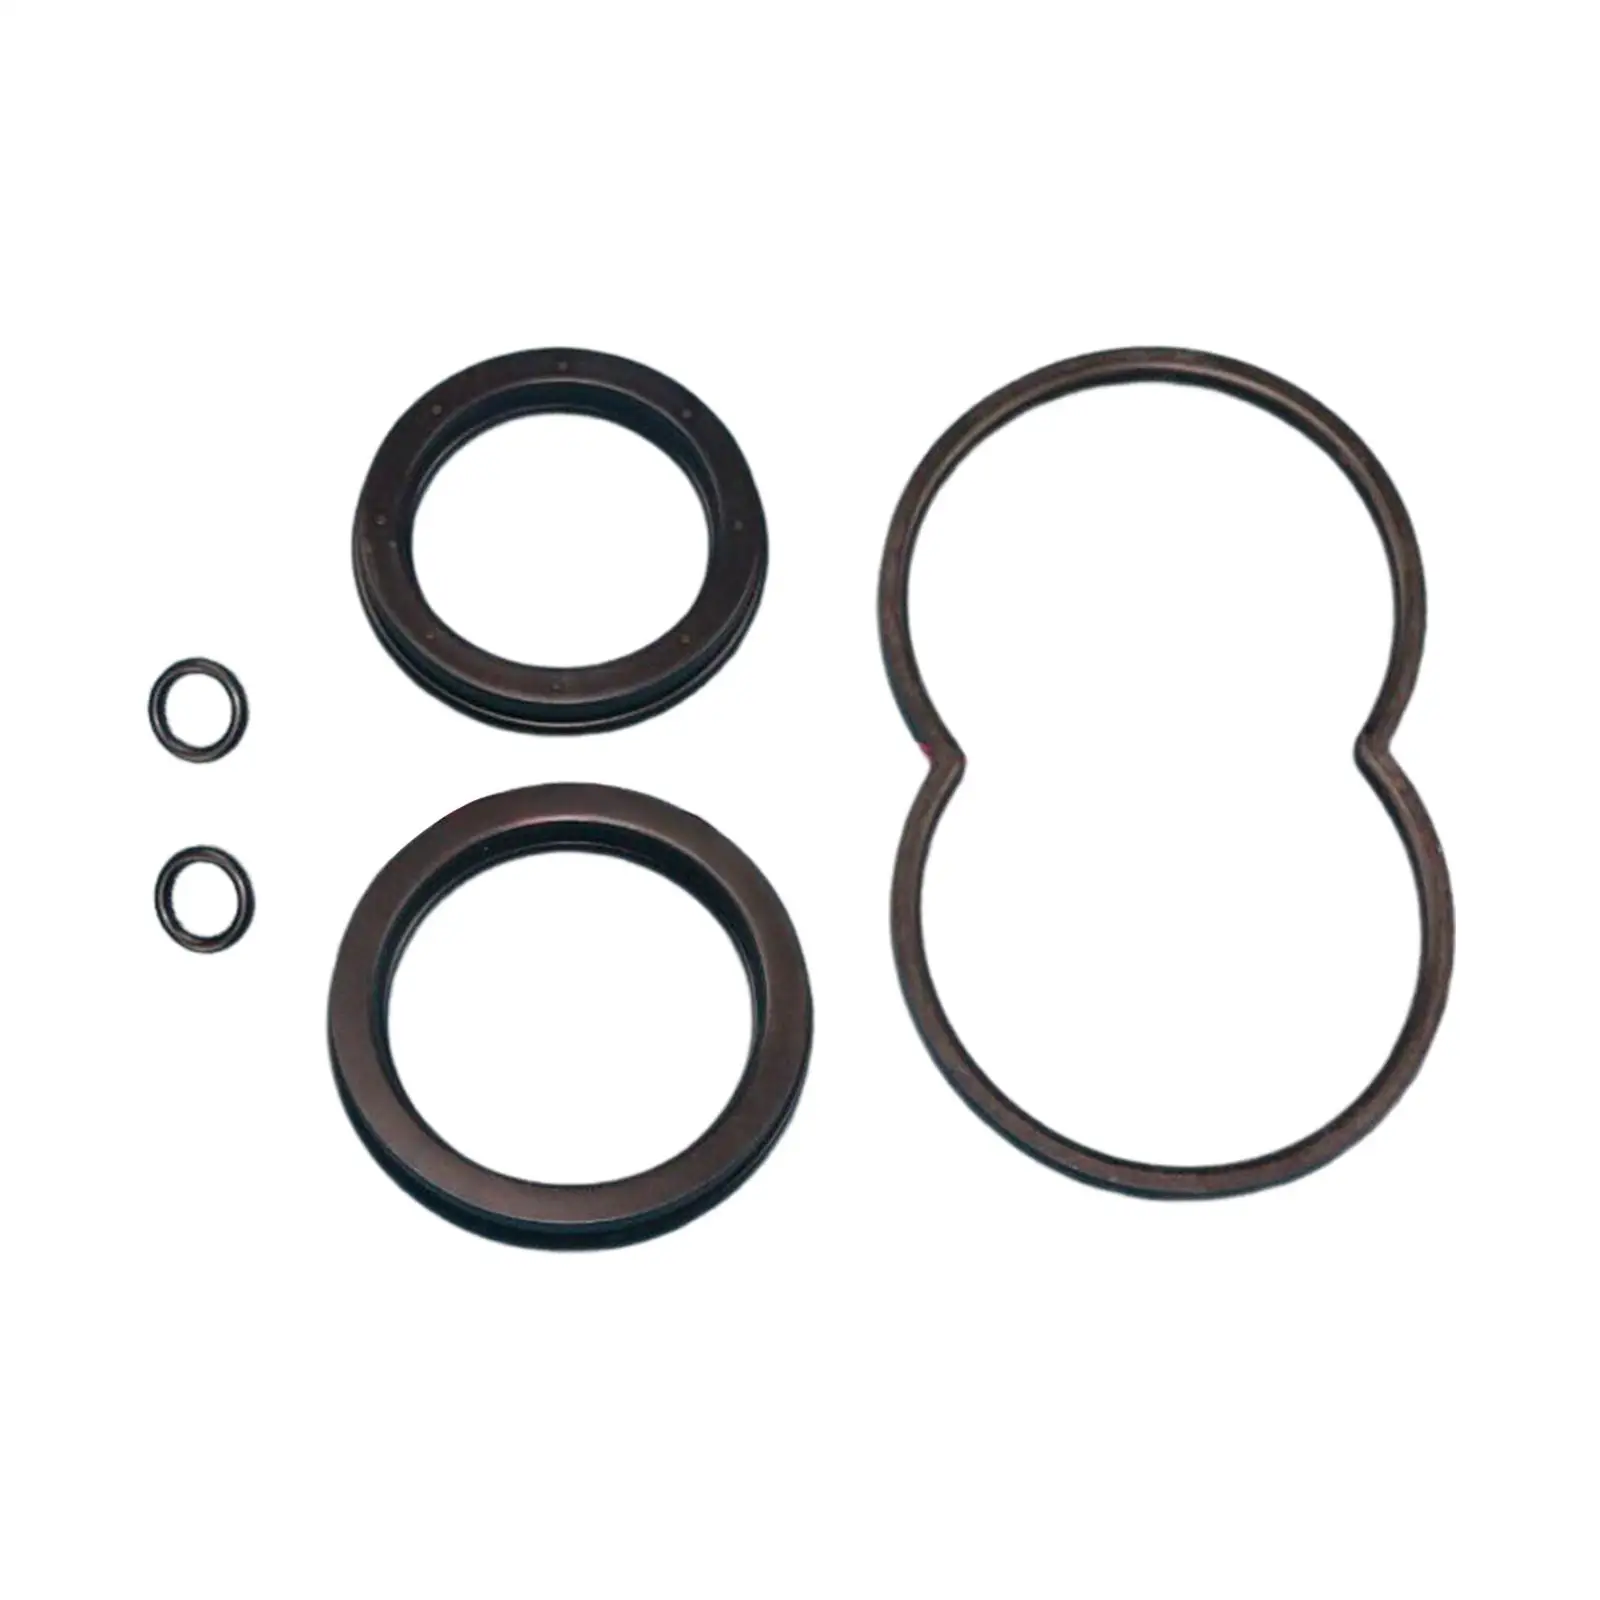 2771004 Seal Leak Repair Kits Easy to Install Components Exquisite Workmanship Auto Fitments 5 Pieces Seal Kits for Ford